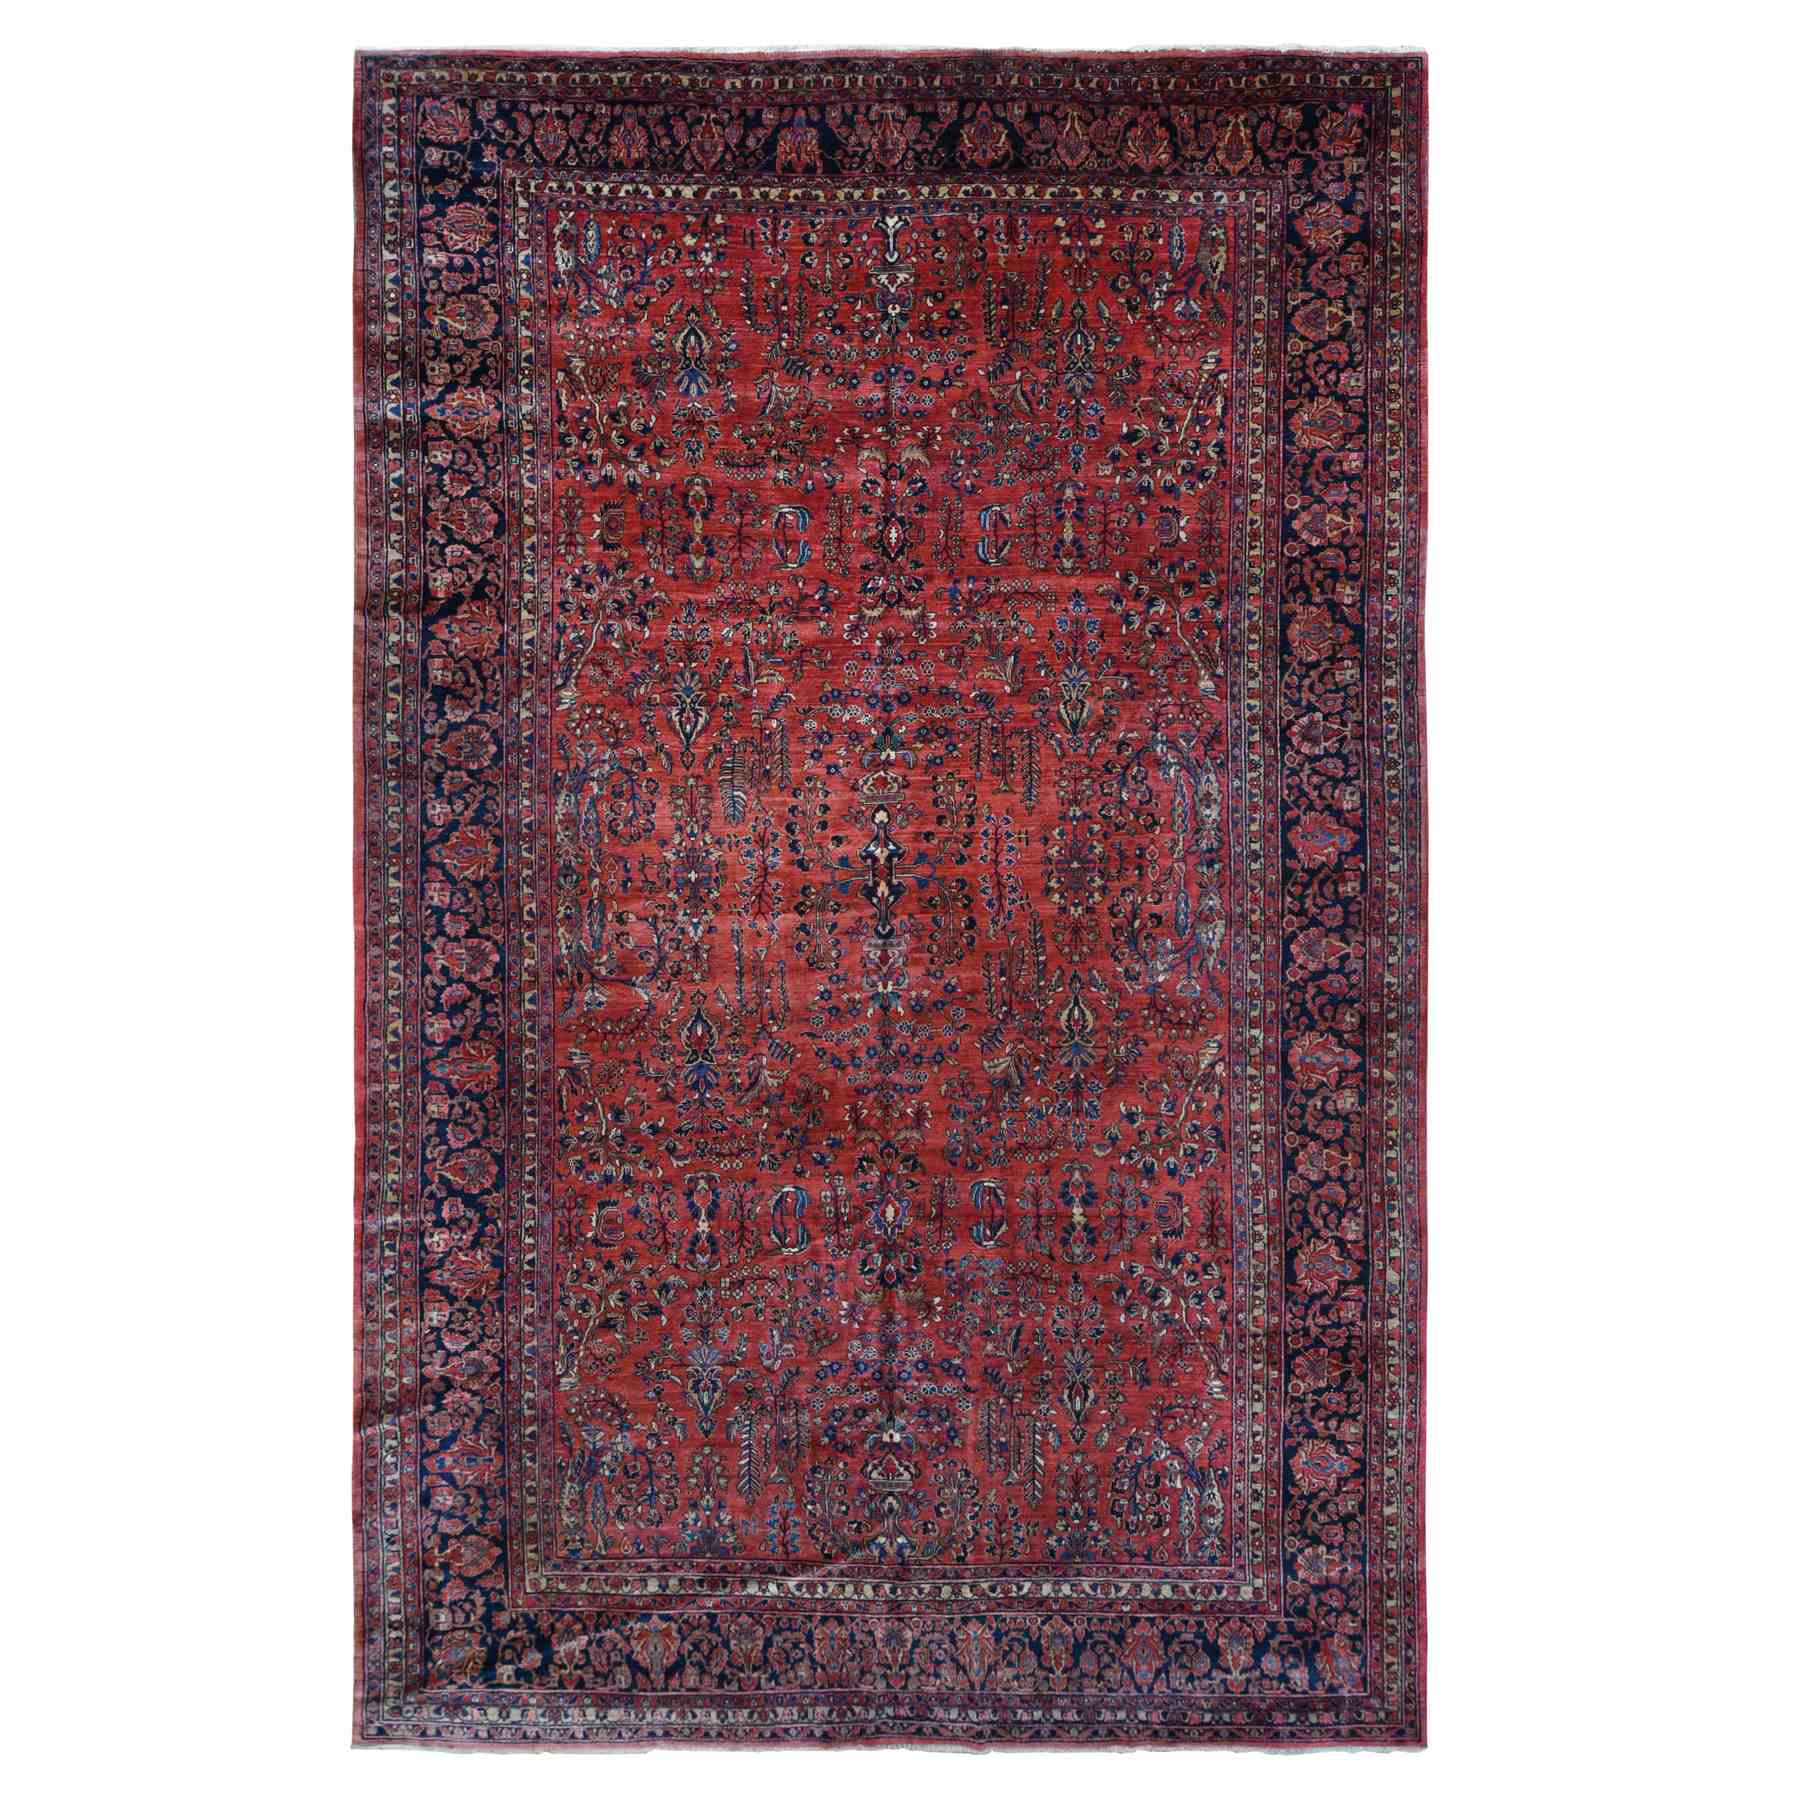 Antique-Hand-Knotted-Rug-438205